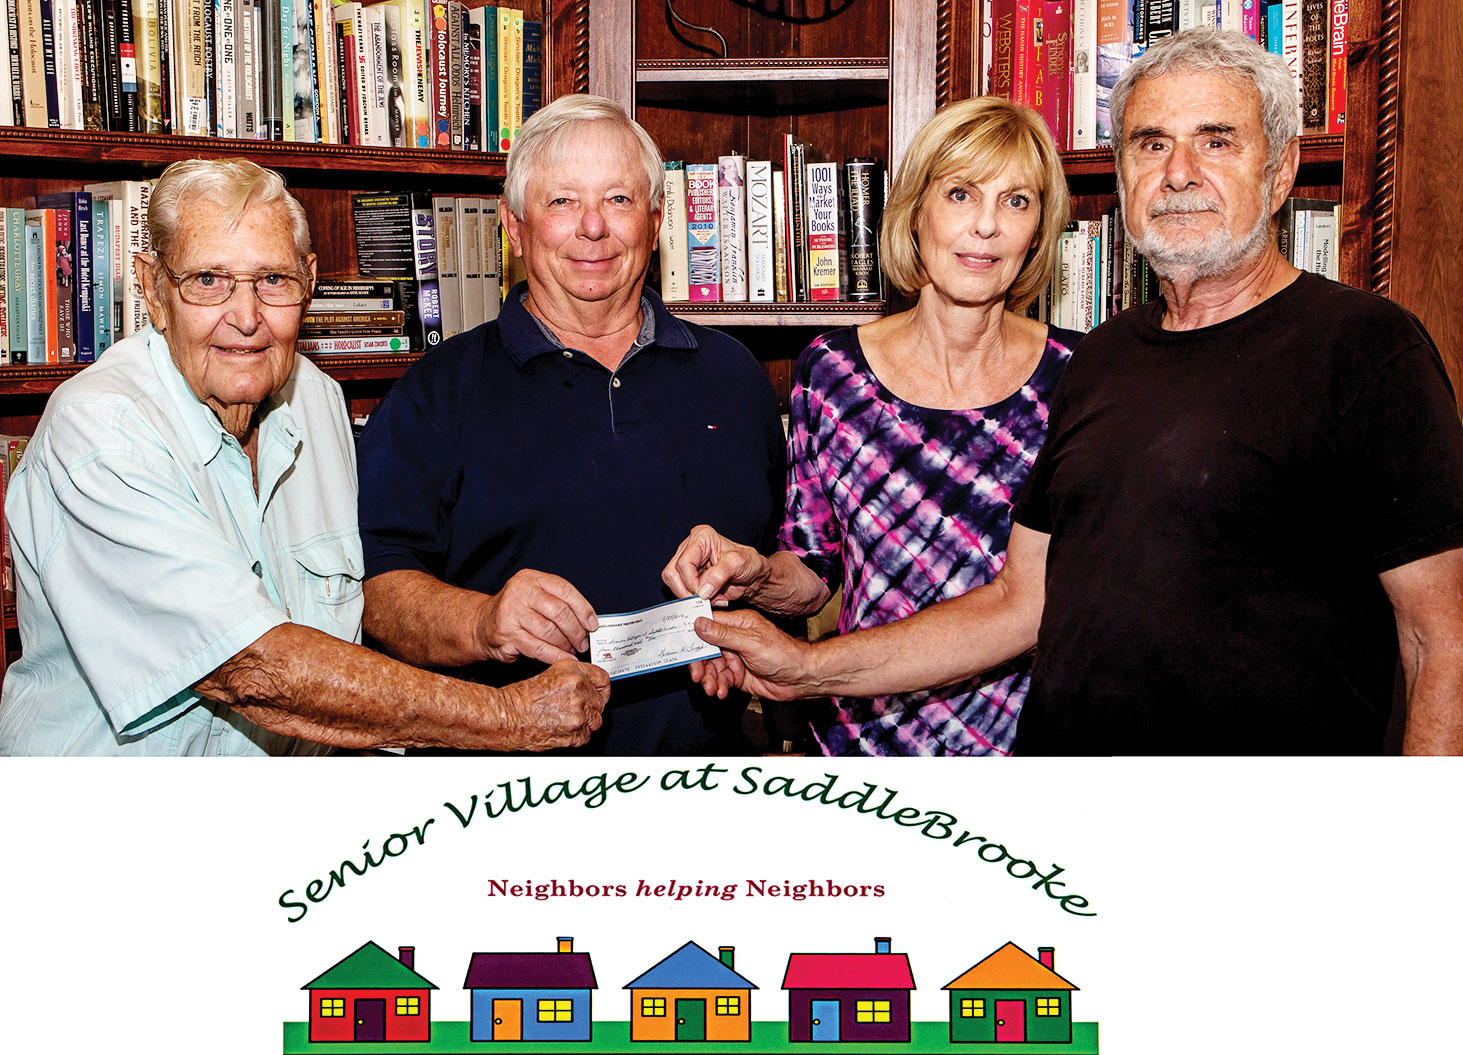 Lloyd Maritz of The Variety Show and Bill Trapp of The SaddleBrooke Theatre Guild hand a donation check to Steve and Susan Shear, founding members of Senior Village at SaddleBrooke.